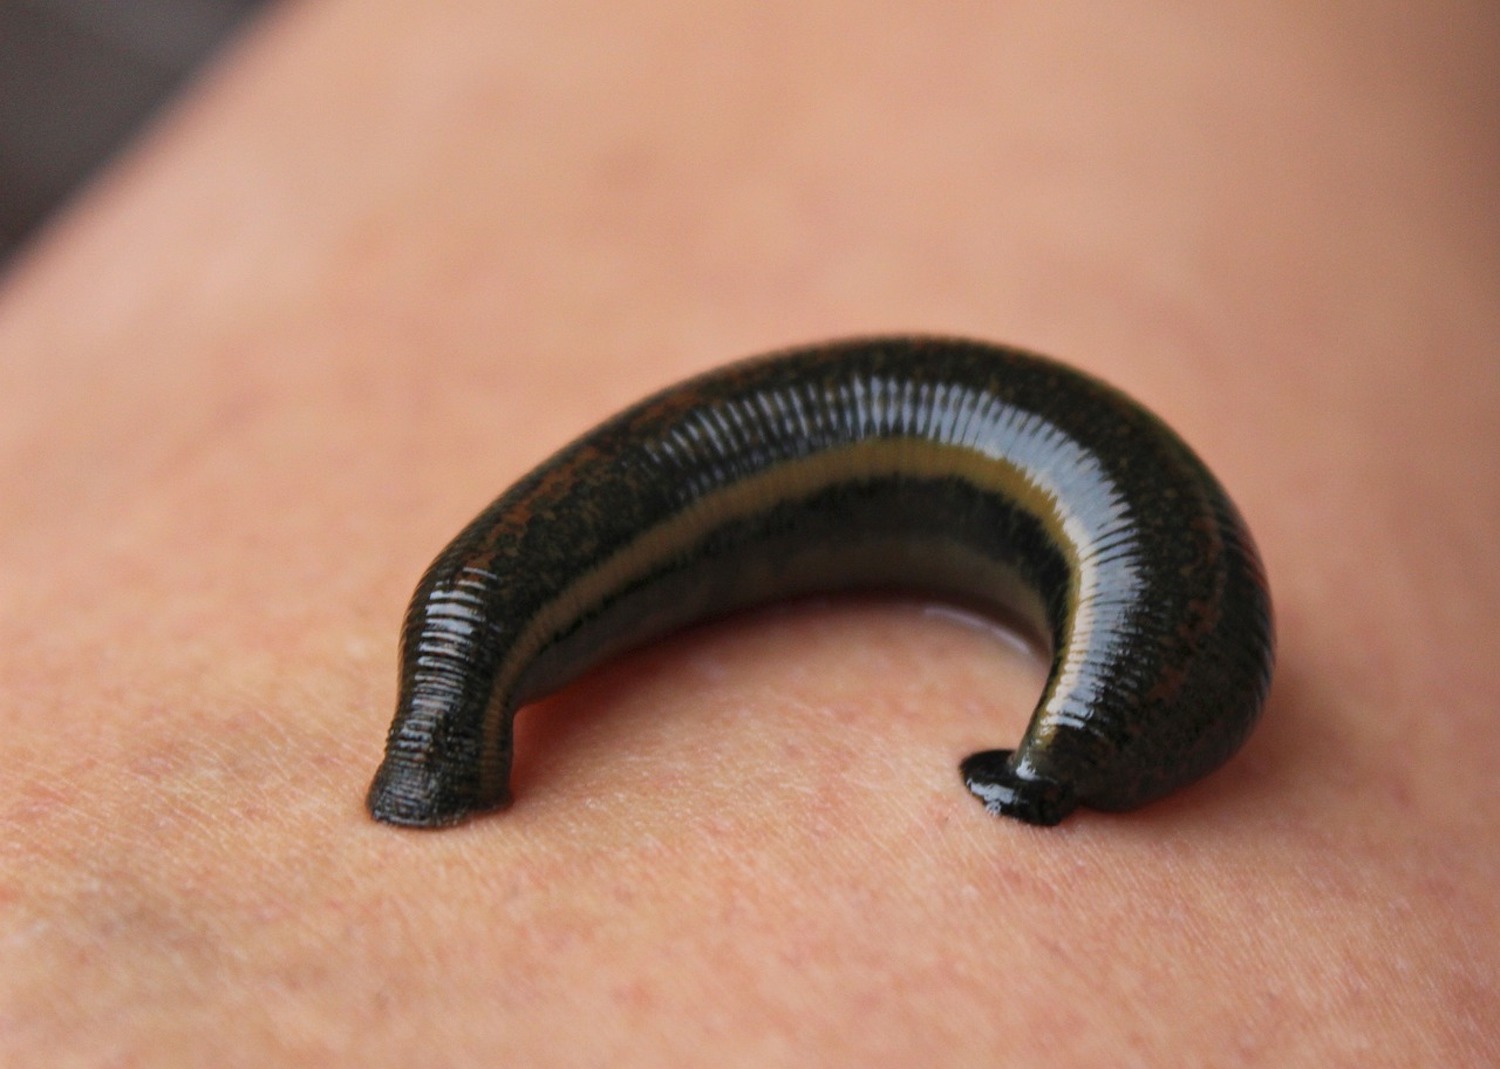 Leeches for skin fungus – can leeches cure fungal infections?